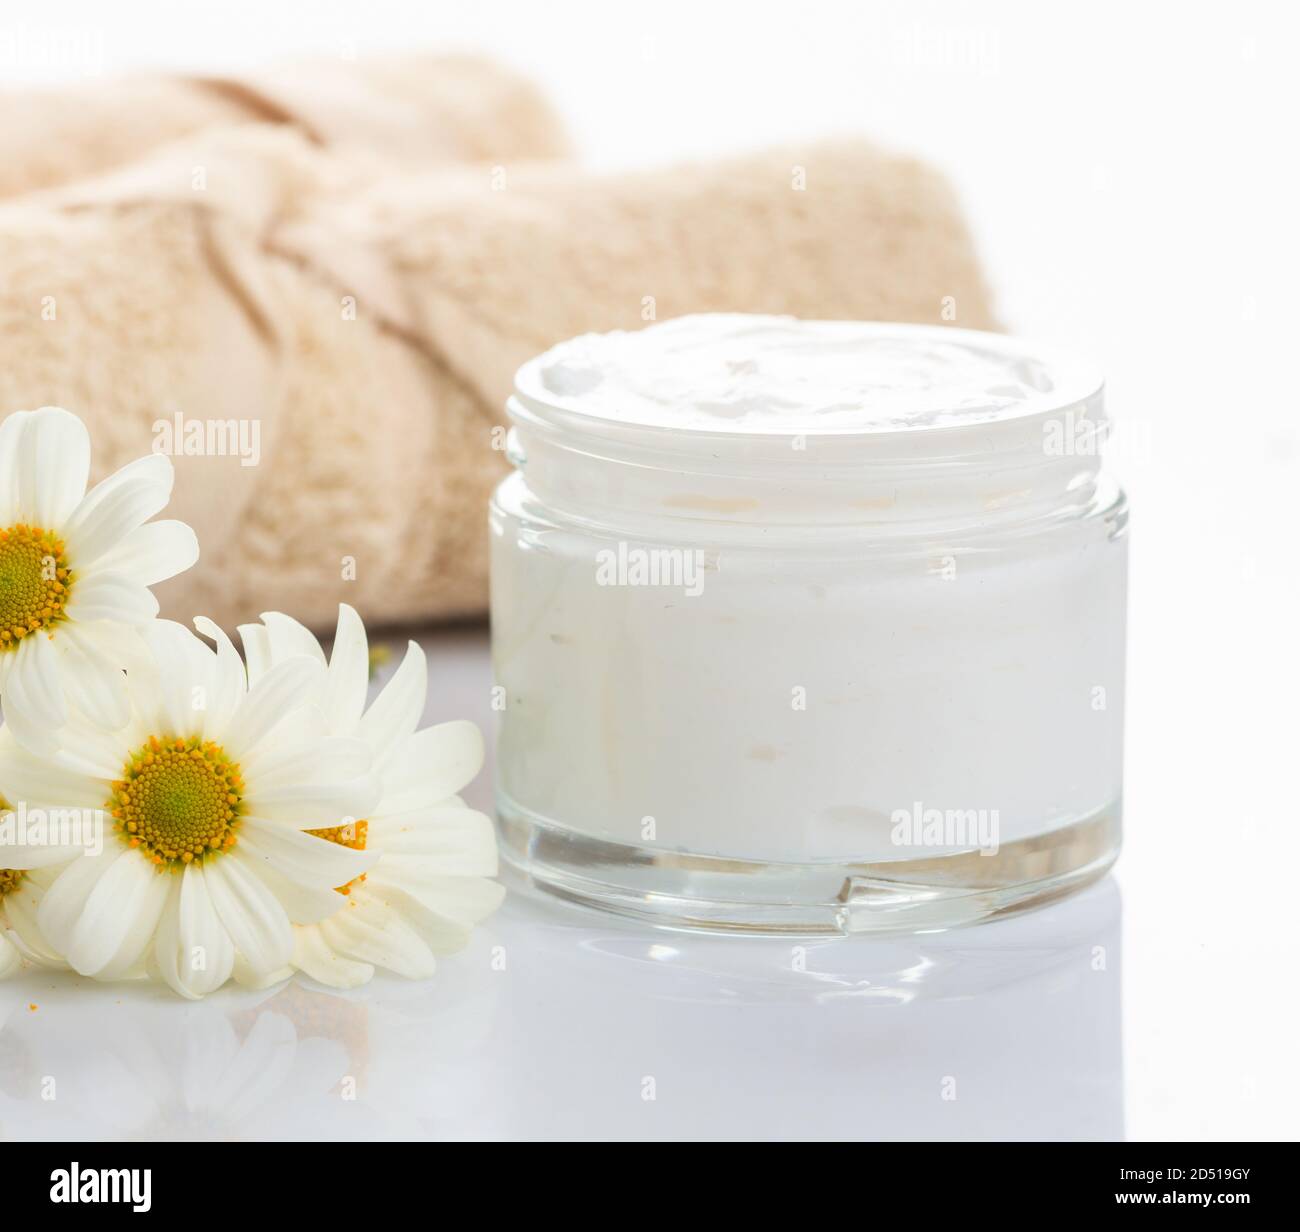 Moisturizing cream in glass jar and chamomile on white background. Camomile cosmetics for face and body with herbal protection. Close up view. Stock Photo